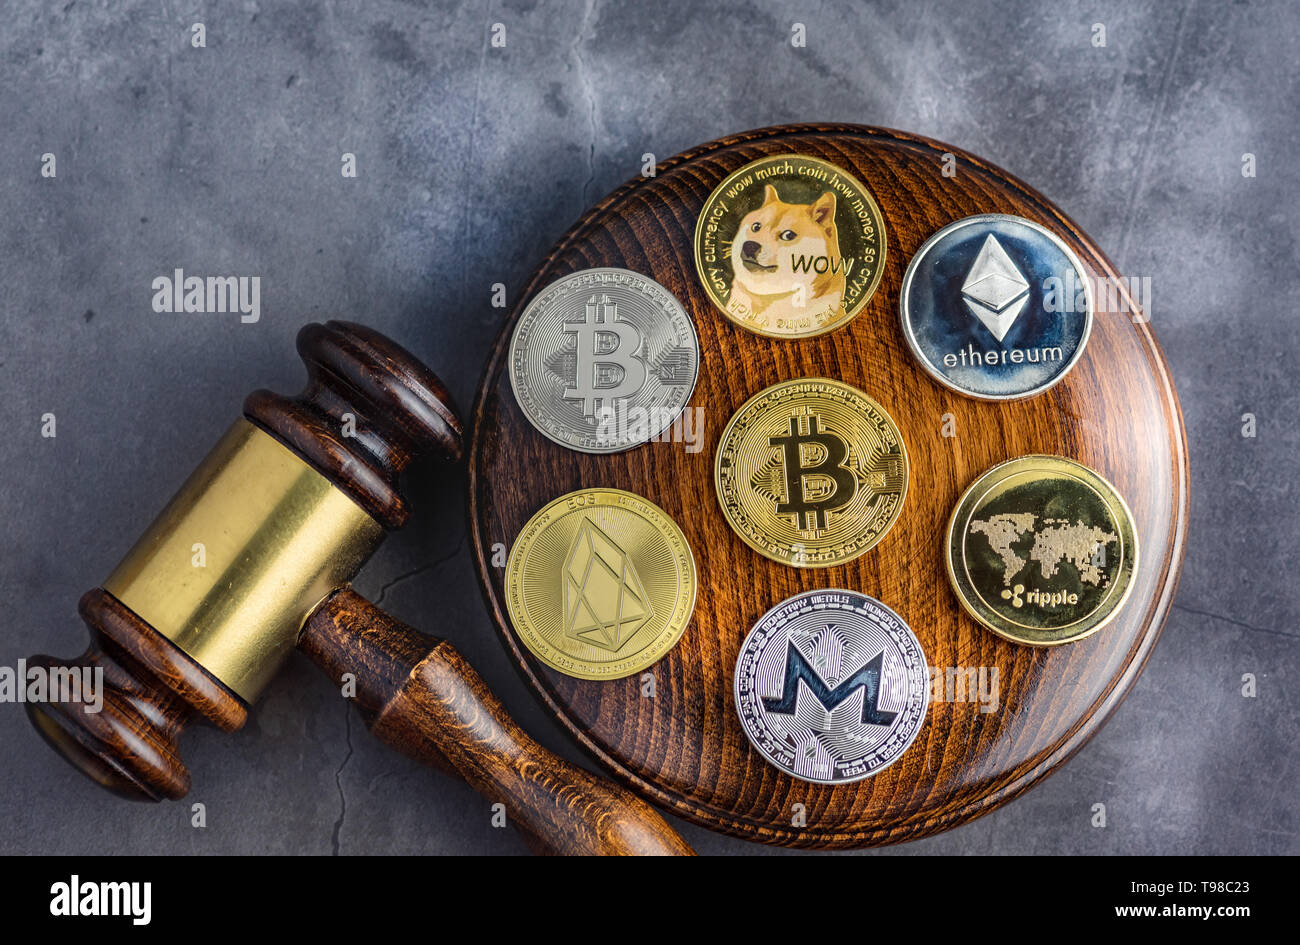 Different cryptocurrencies and gavel over gavel wooden board.Concept image for cryptocurrency Stock Photo